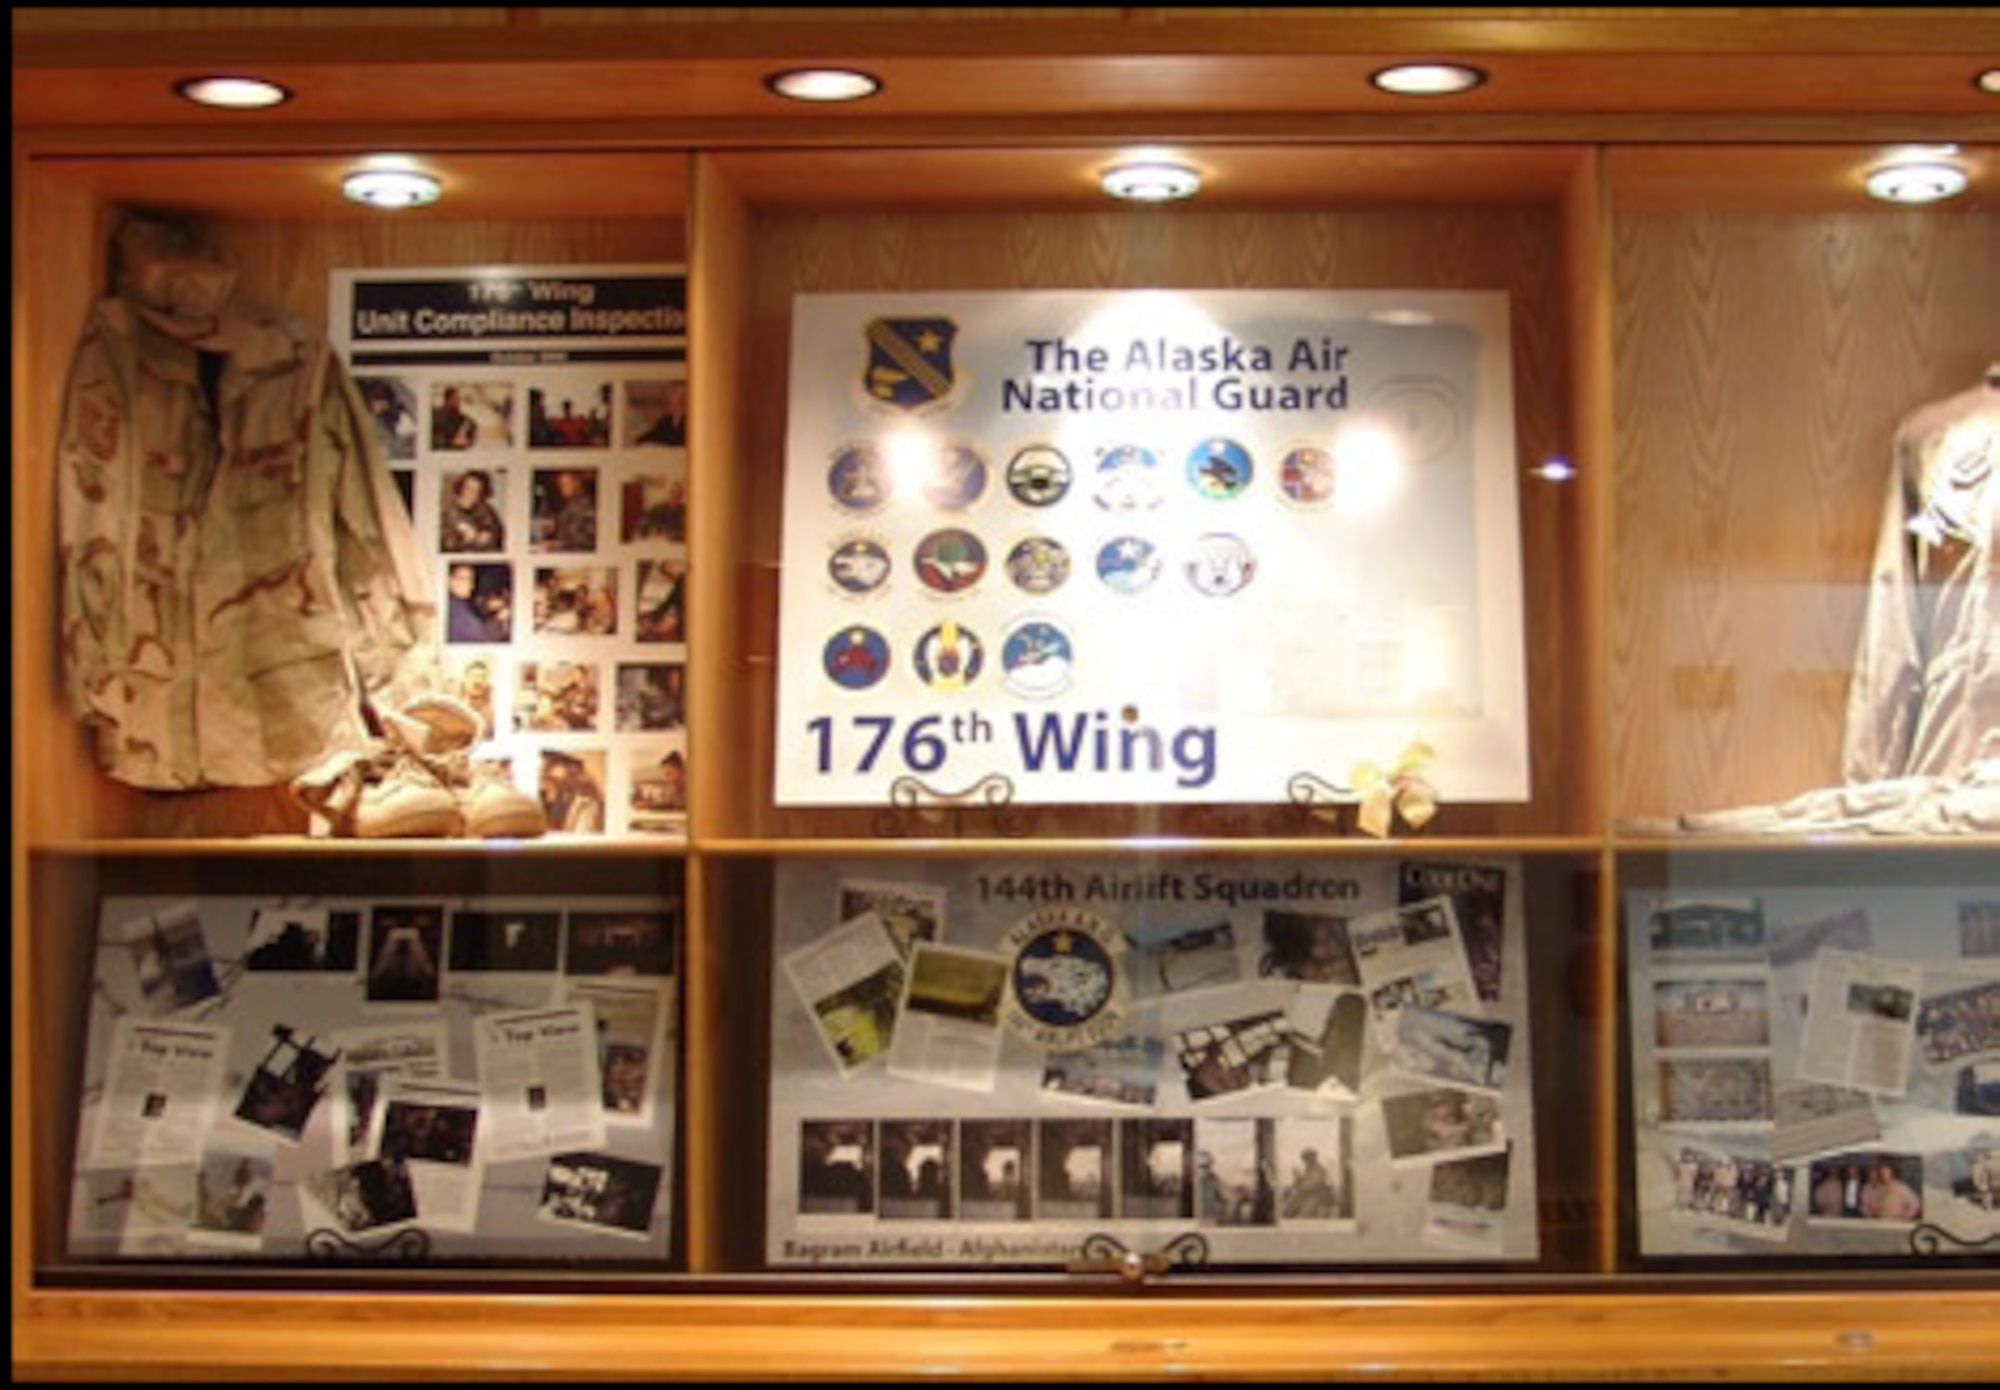 From October 2006 through December 2006, this exhibit at the Anchorage Readiness
Center on Ft. Richardson highlighted an inspection of the 176WG, and a deployment
of the 144AS. Photo by MSgt. Robert M. Braley, Jr.